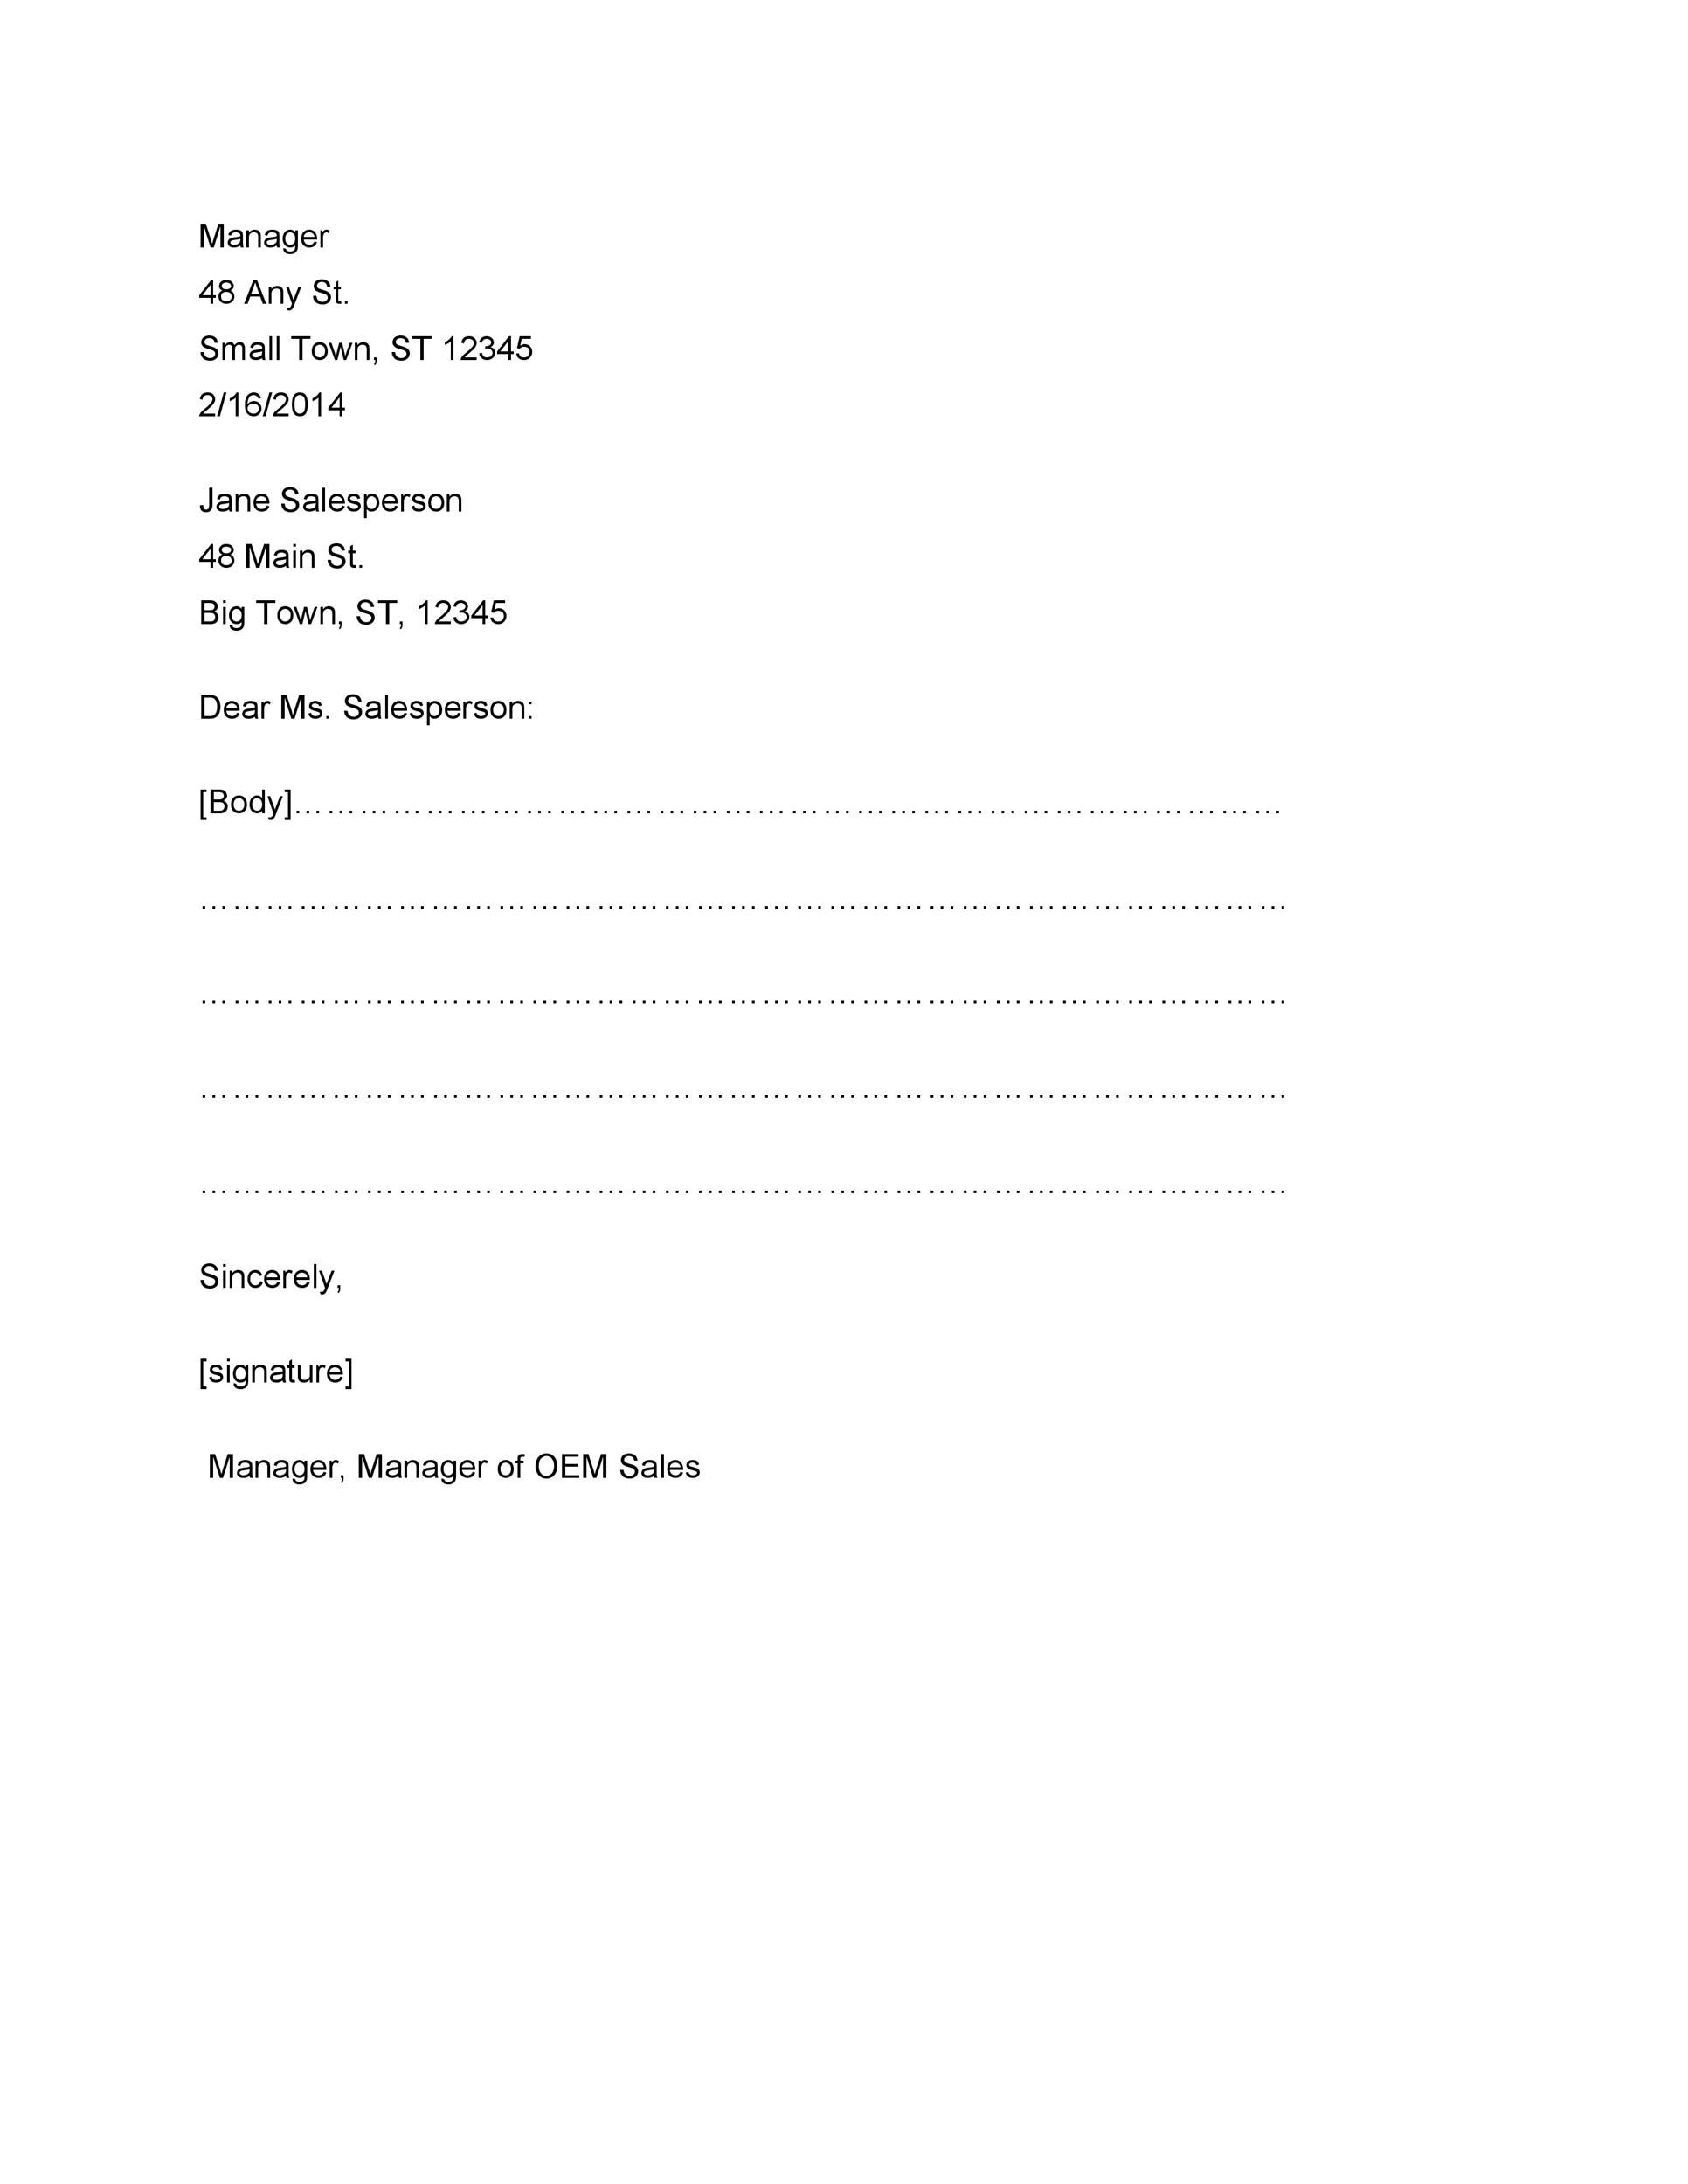 Standard Business Letter Template from templatelab.com